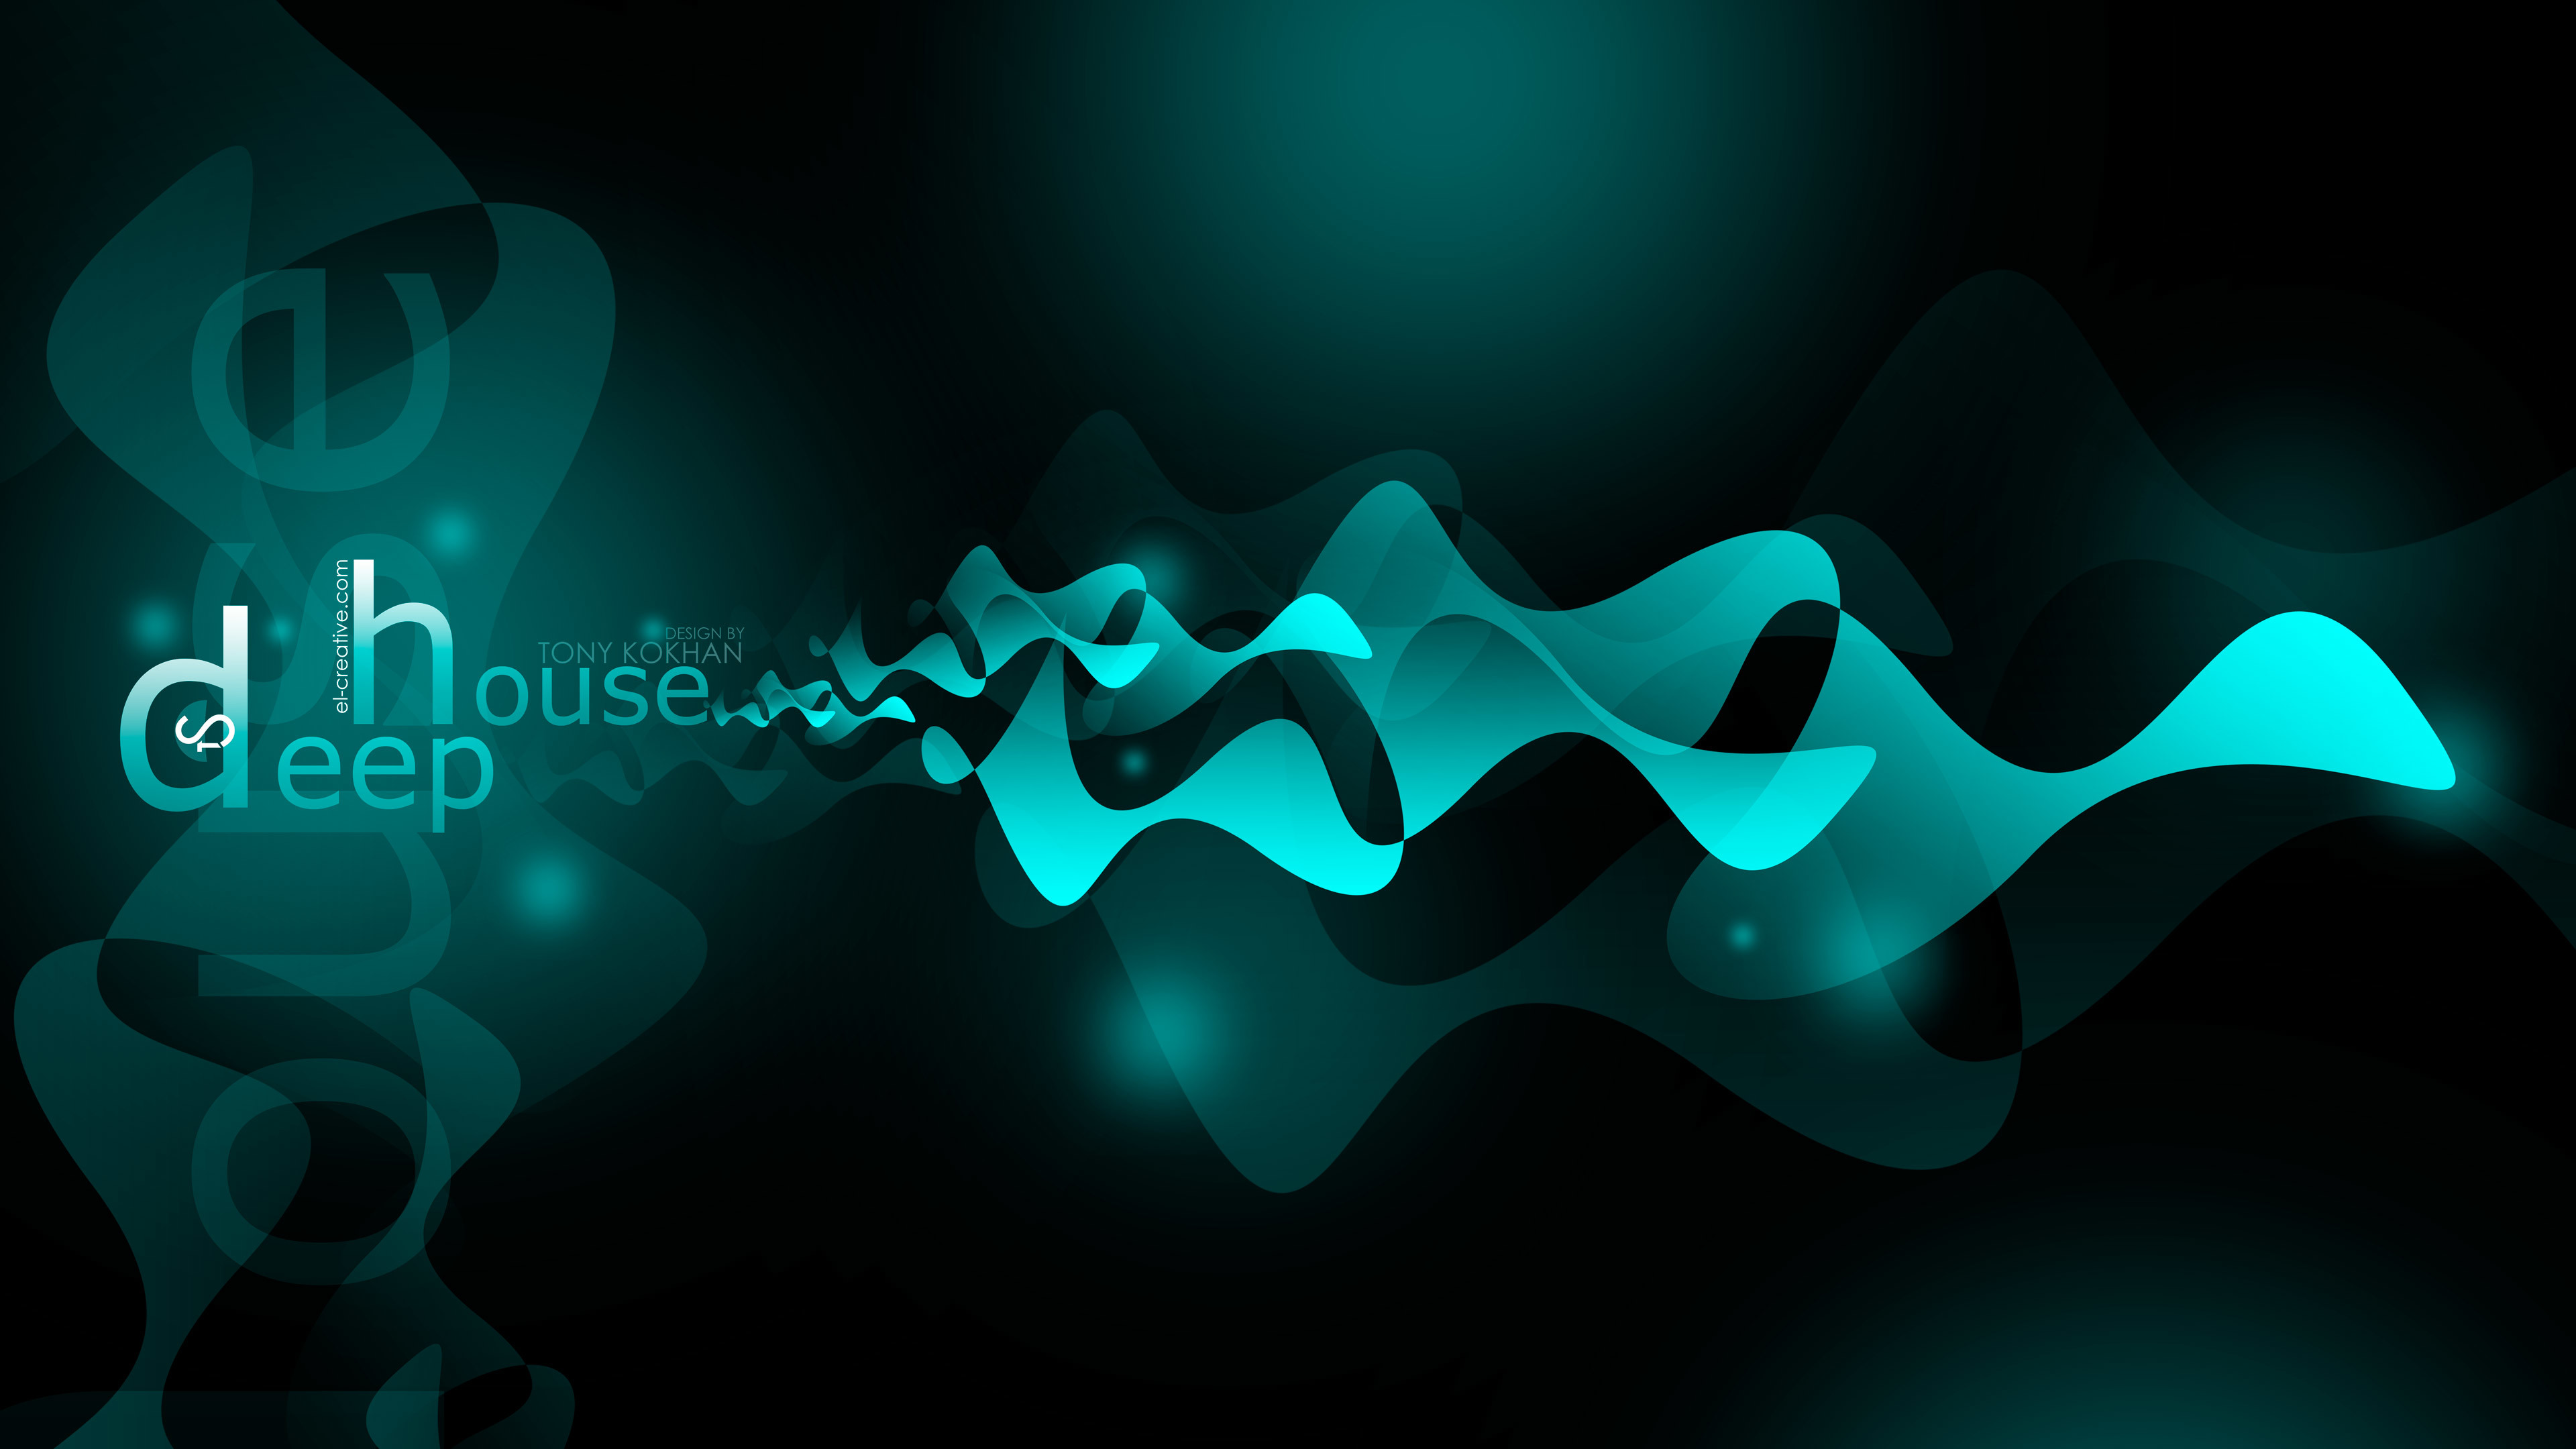 house azure neon music words dj style abstract 4k wallpapers